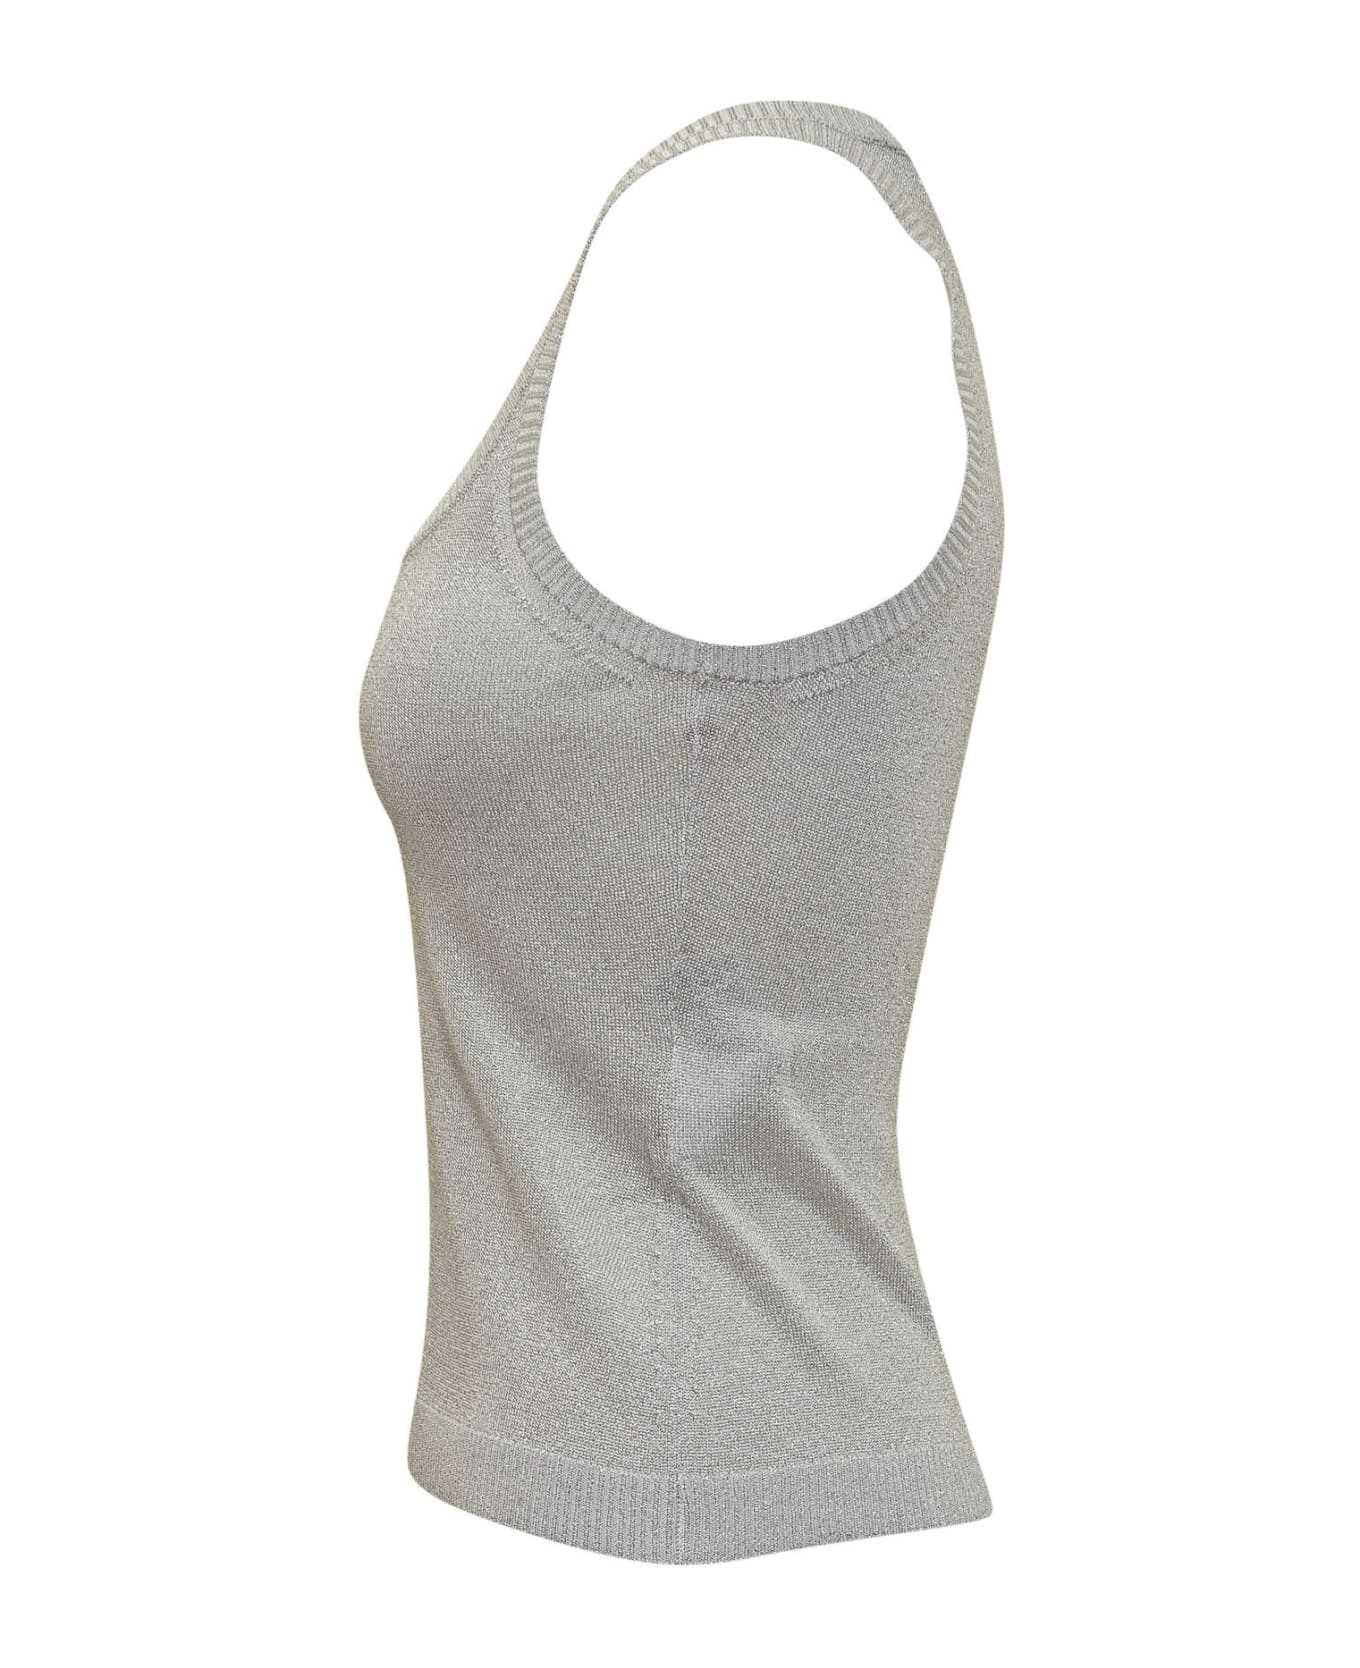 Missoni Viscose Tank Top With Metalized Filaments - Silver タンクトップ